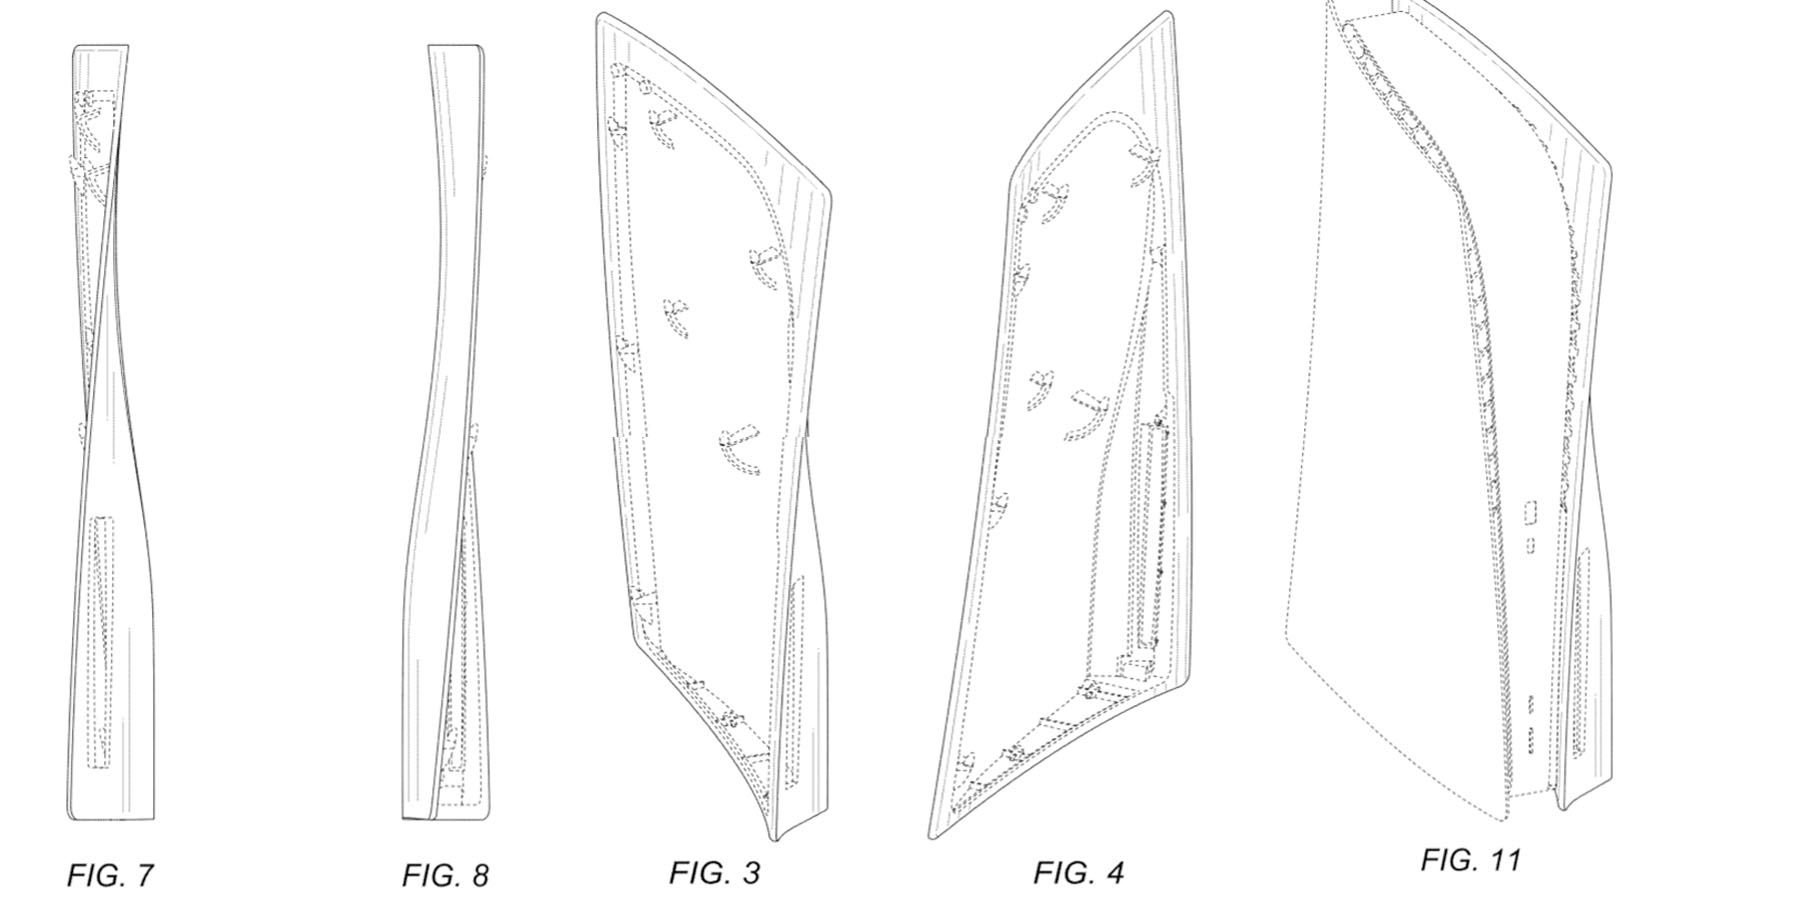 PS5 face plate patent